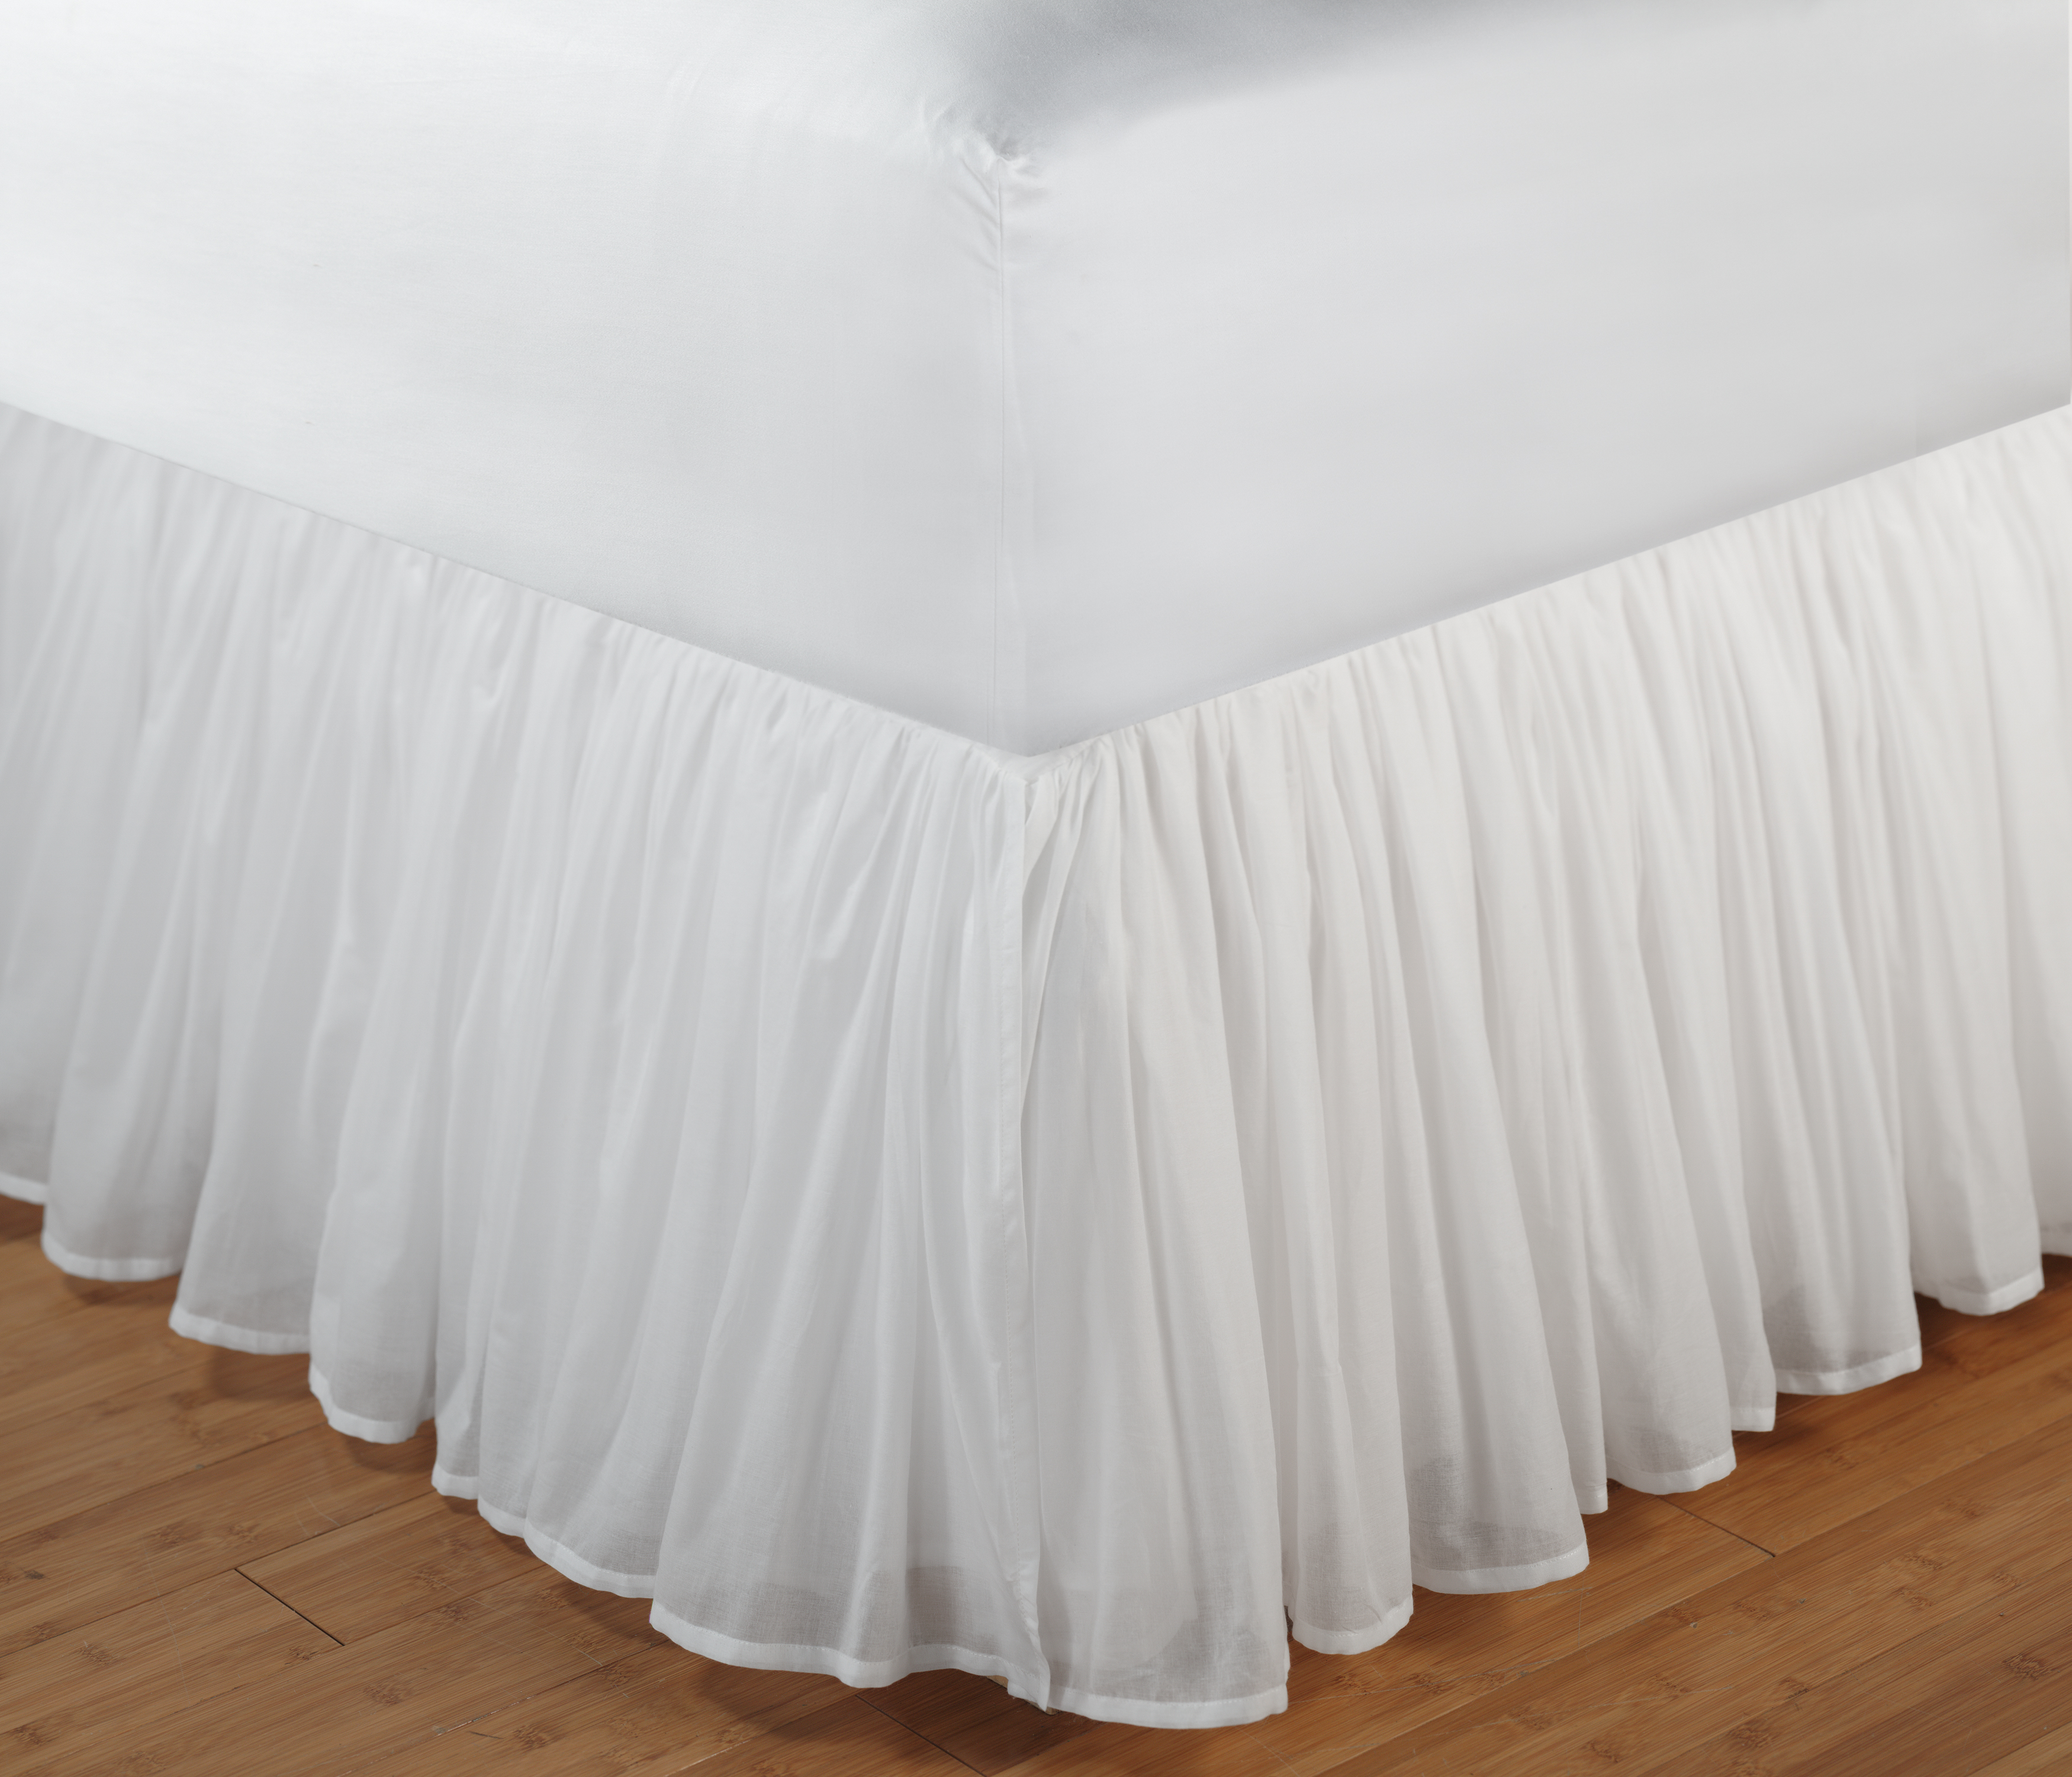 Greenland Home Fashions Cotton VoileWhiteBed Skirt 18Full, White